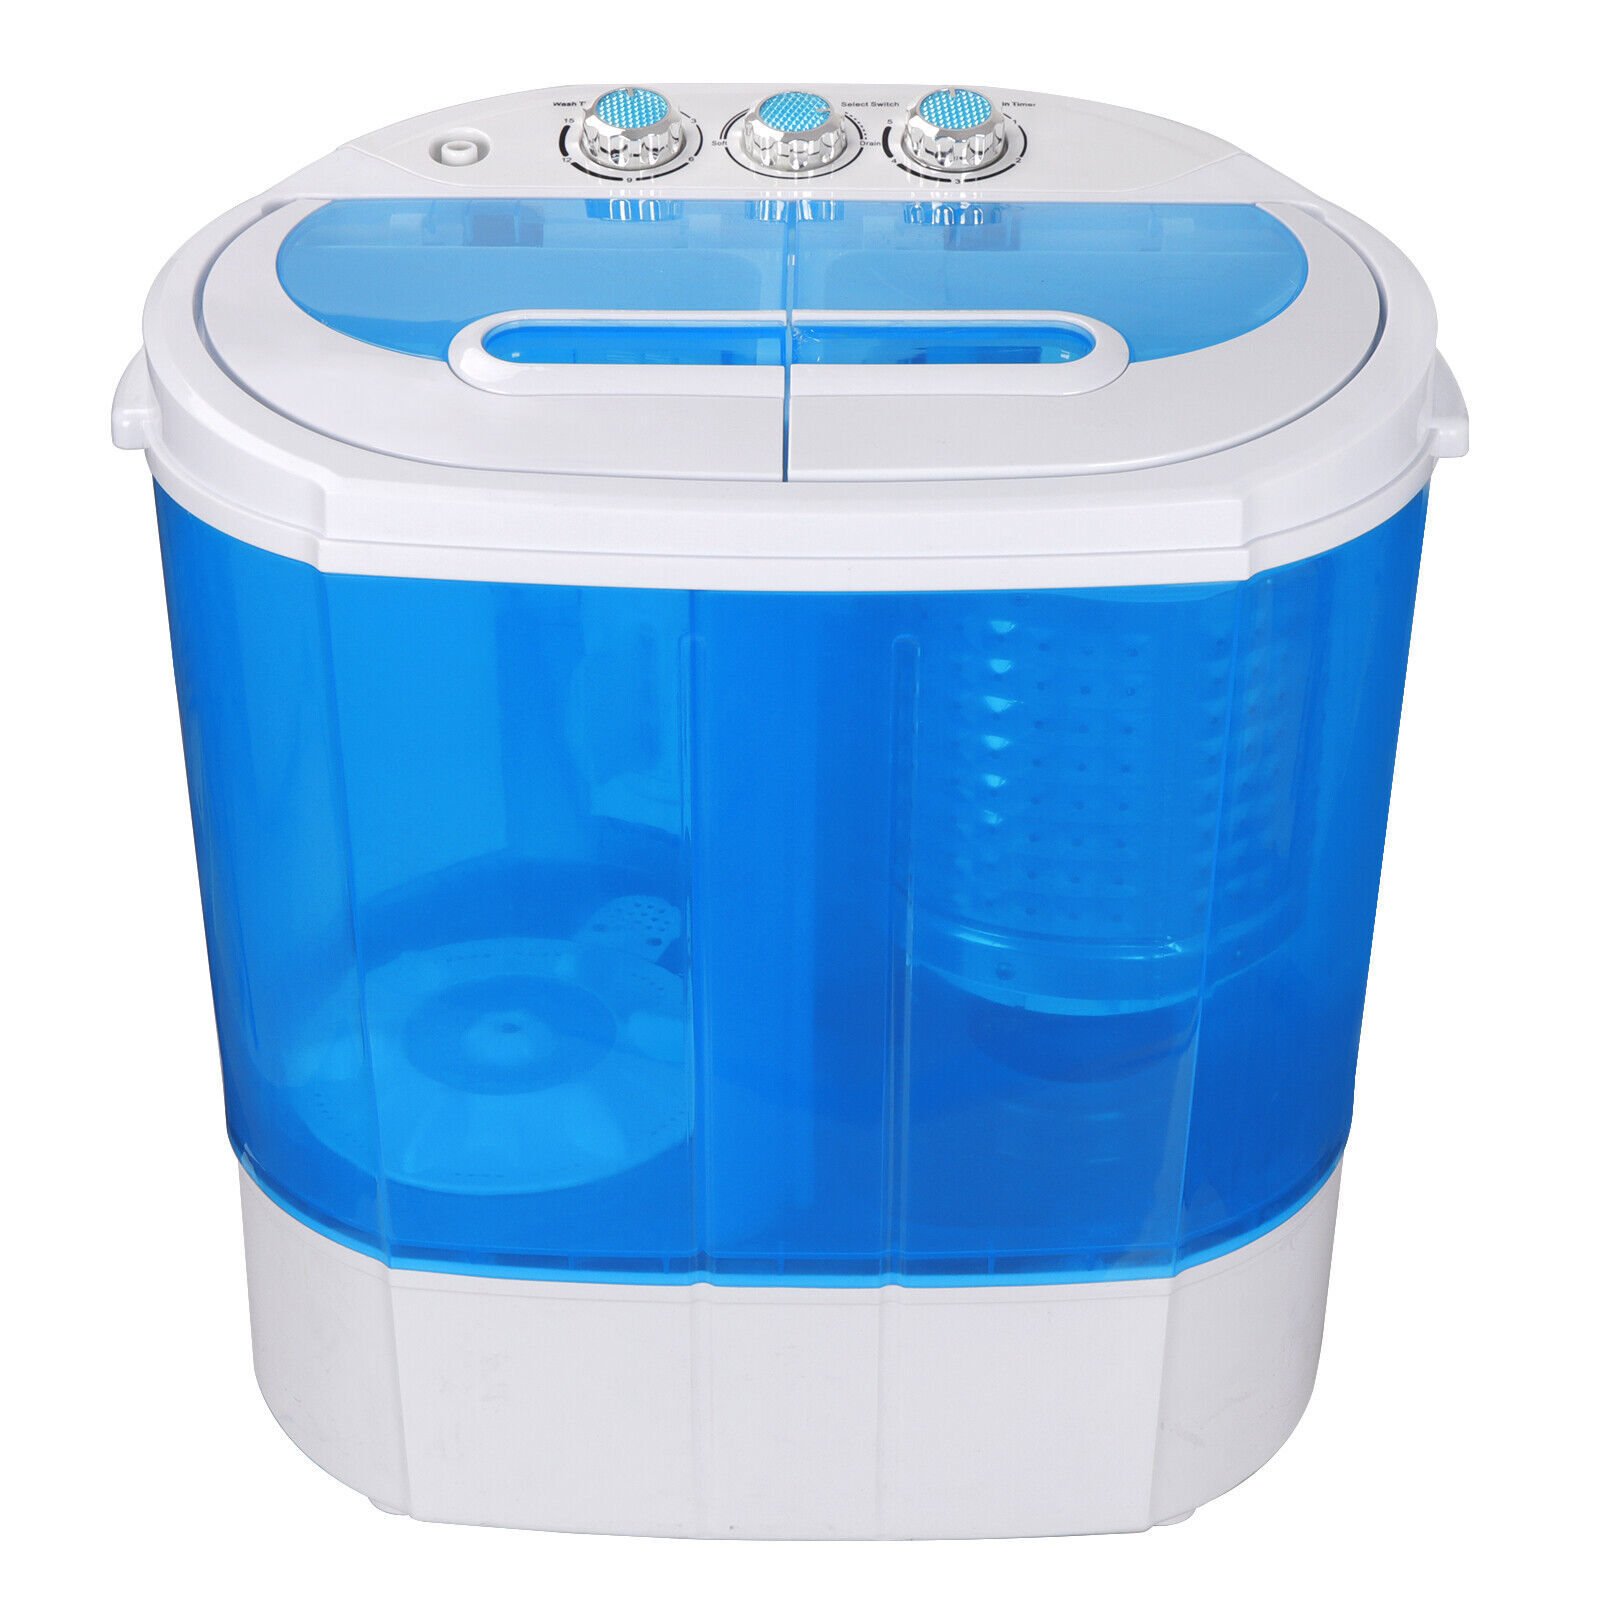 Primary image for 10Lbs Mini Portable Compact Washing Machine Spin-Dry Laundry Washer And Dryer